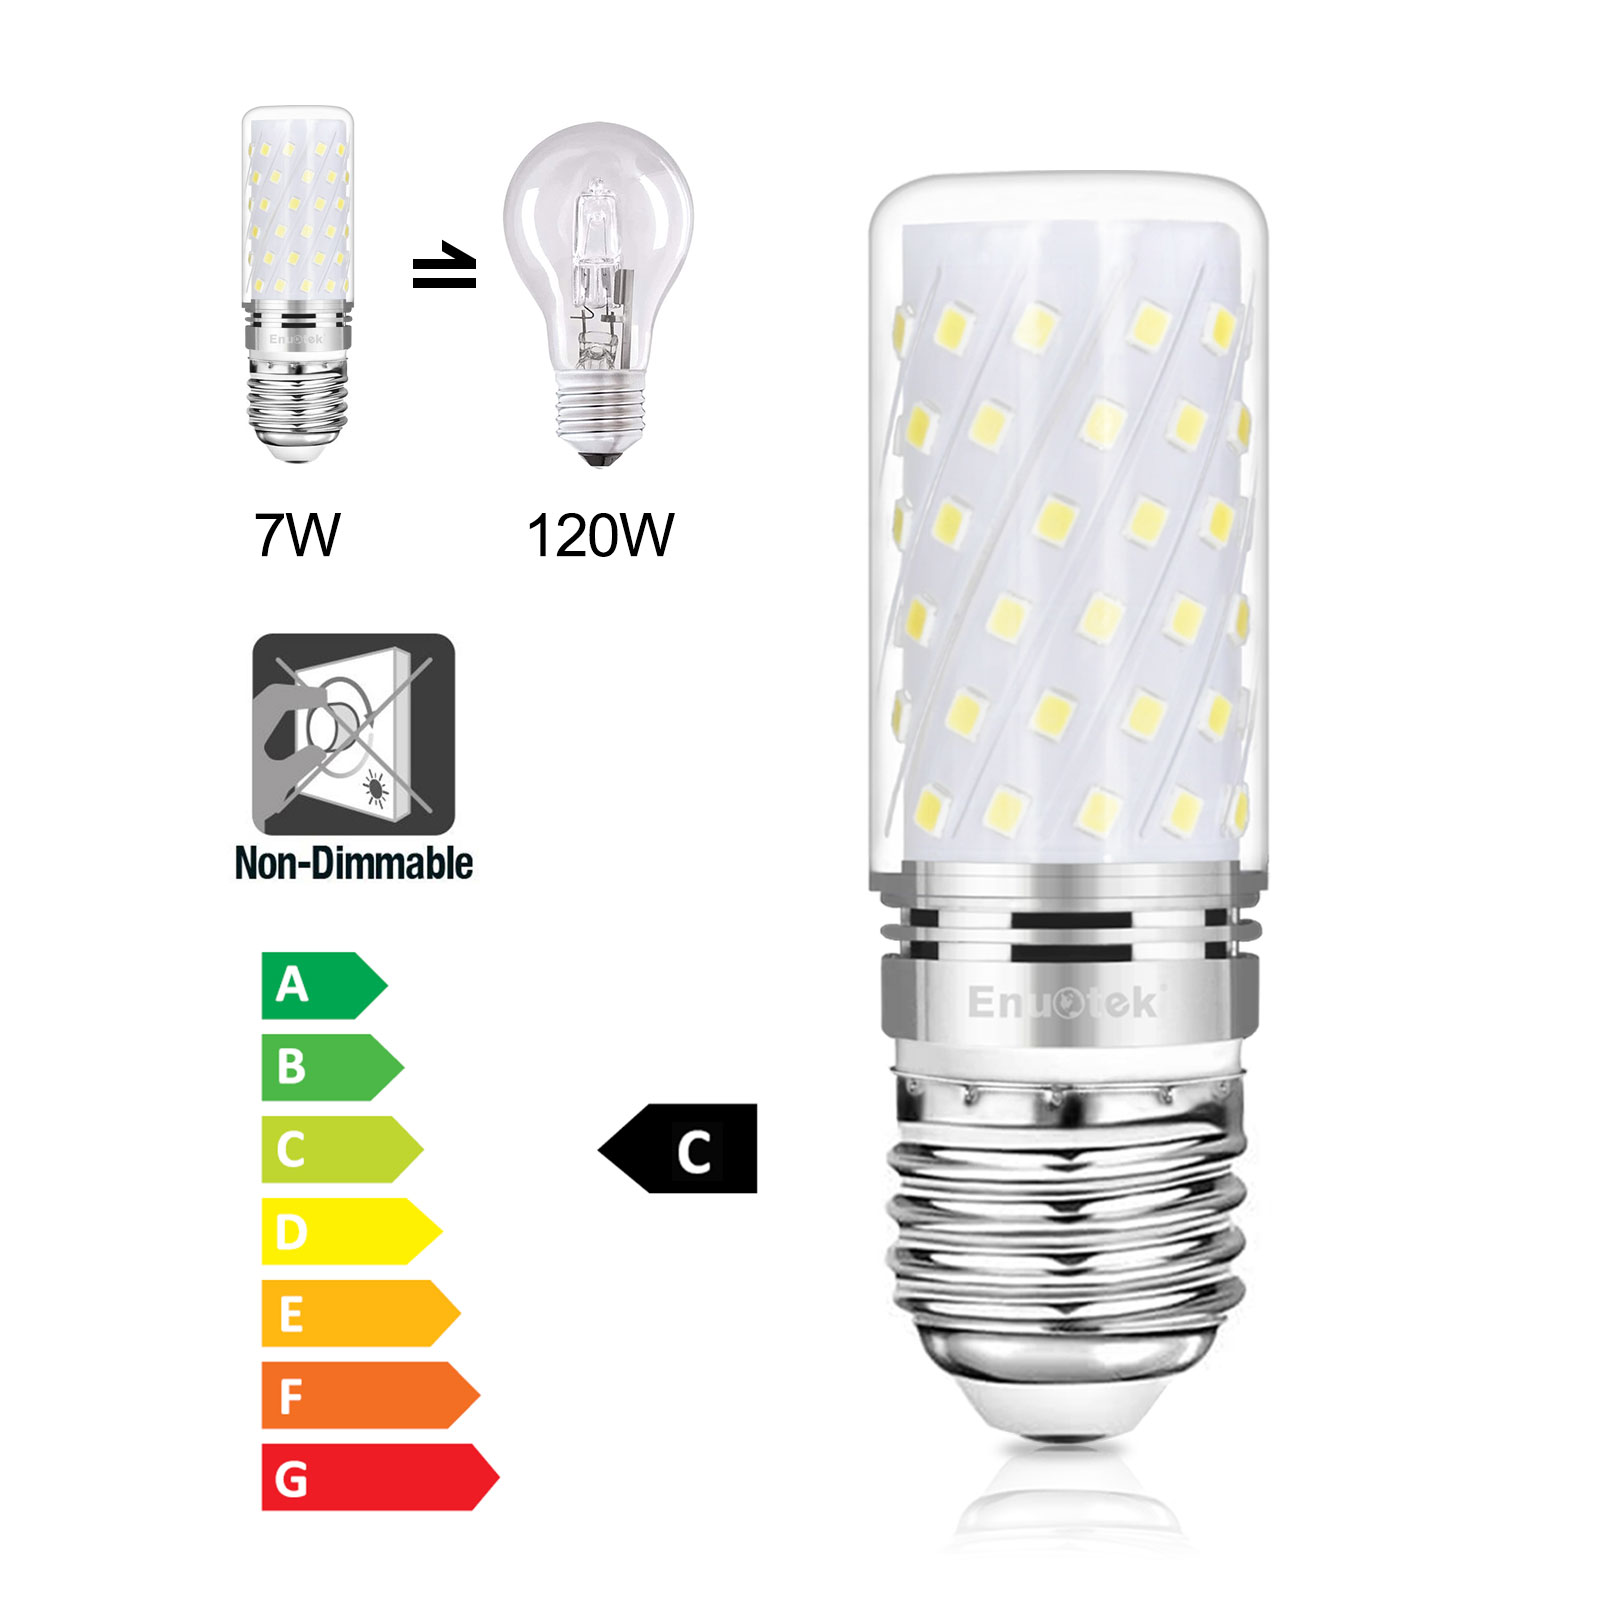 Vwcoik Kitchen Extractor Bulb e14 7w led Bulb Edison Screw Small Chandeliers Room Lamps Warm White 3000K Kitchen Lamps etc. 2 Units Suitable for Table Lamps Equivalent to 50W Halogen Bulb 